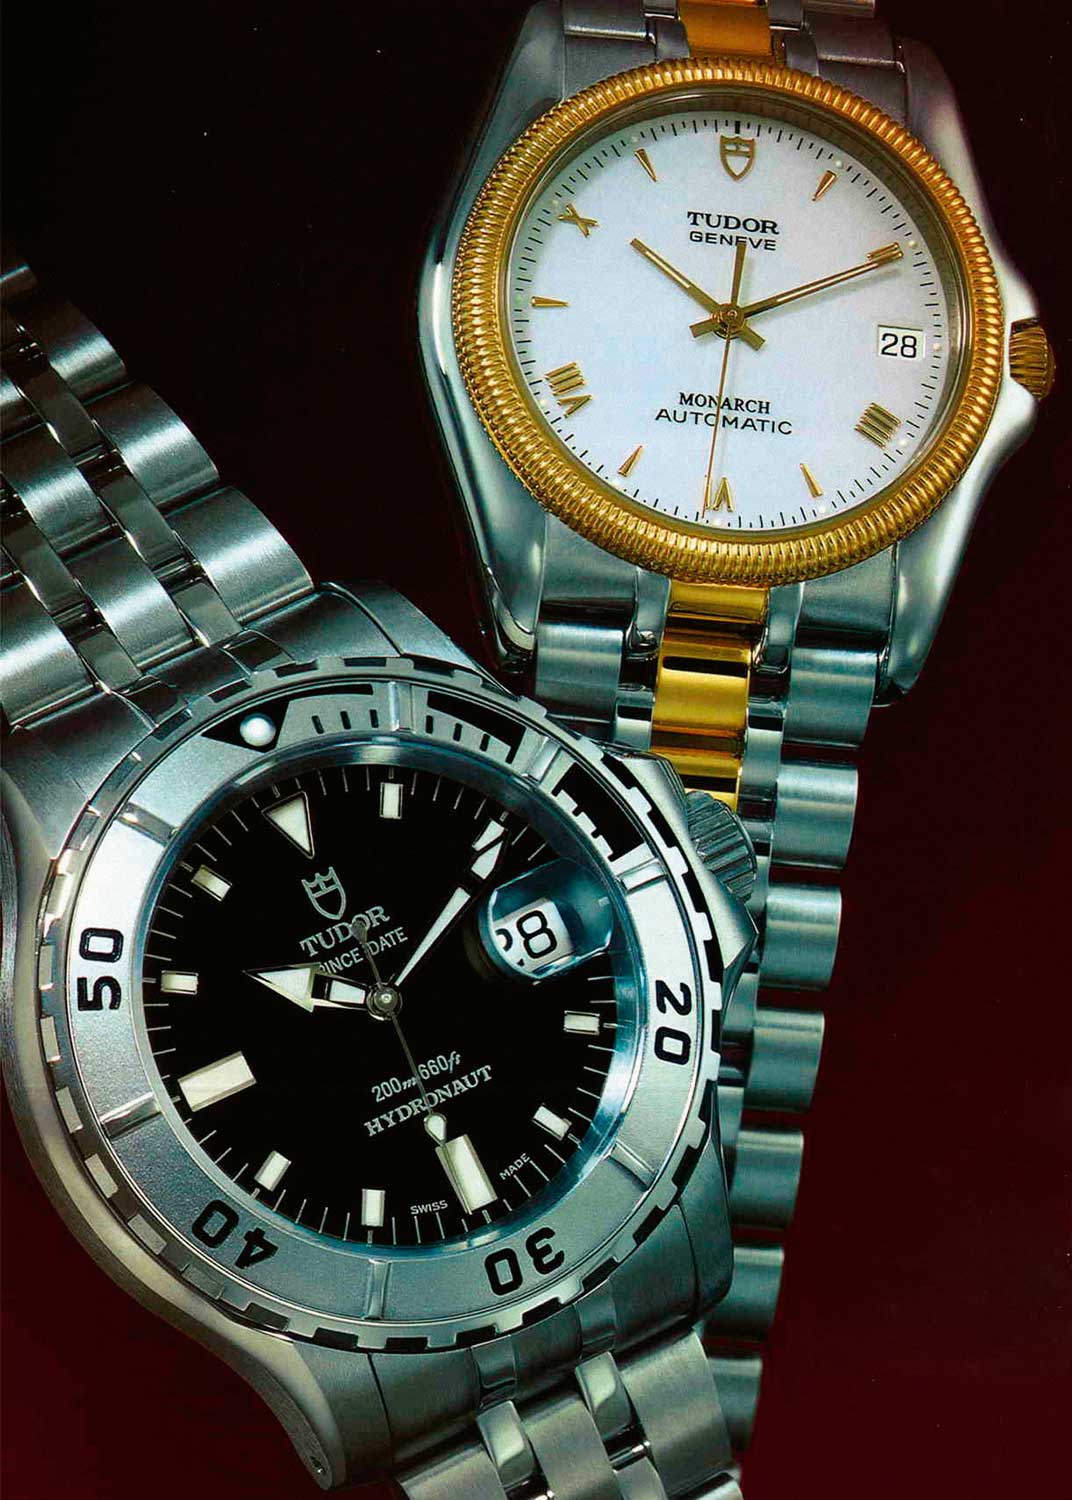 Tudor’s sport reference 89190 replaced the full-sized Submariner reference 79190 in 1998. The new watch was initially catalogued as the Prince Date Diver (left) and released alongside a dress watch called the Monarch Automatic (top)